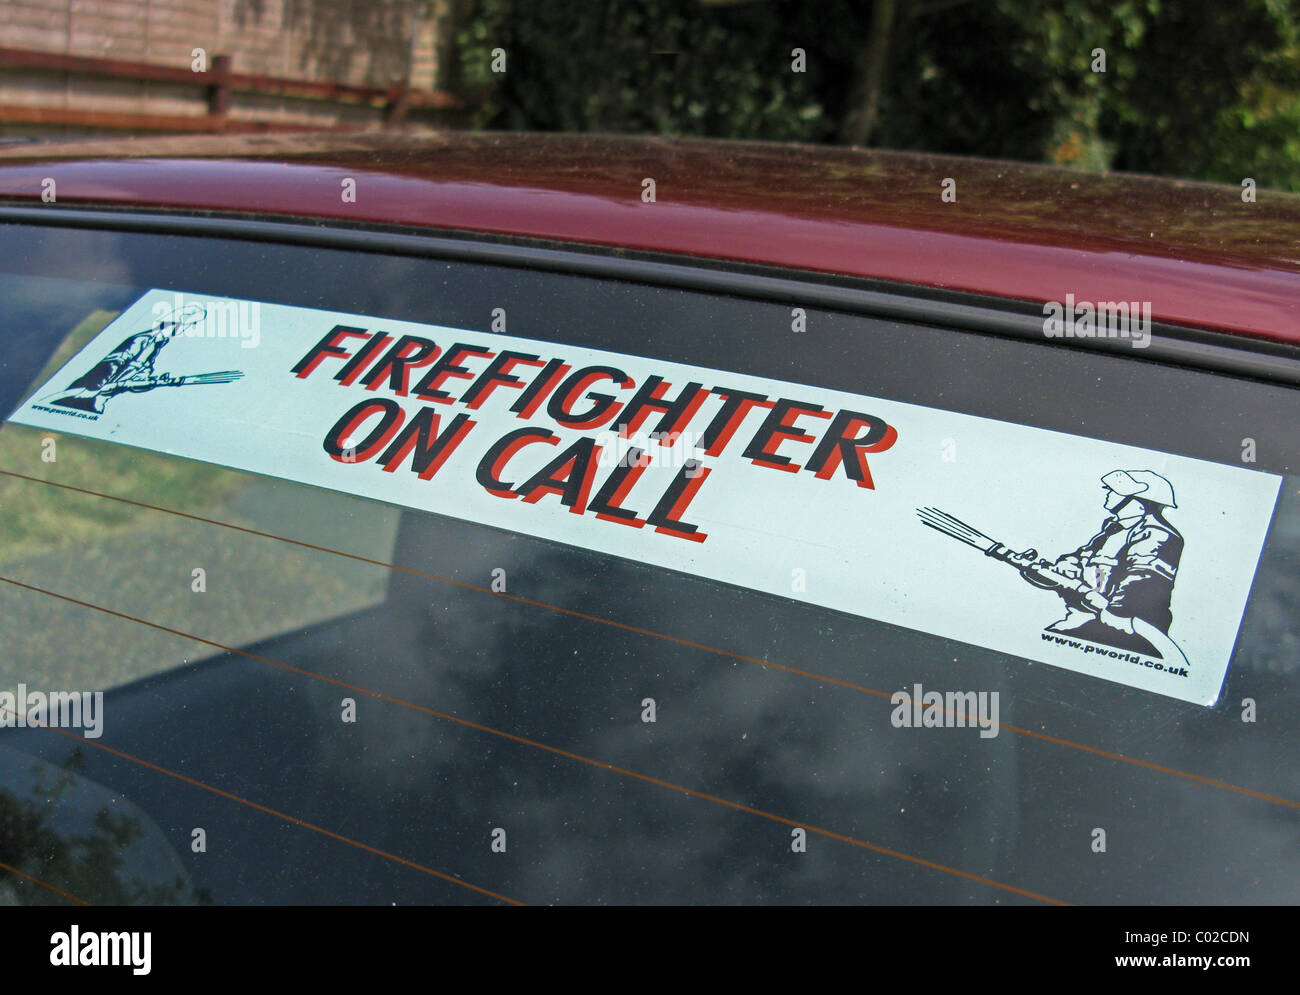 Firefighter On Call sign on a car widow Stock Photo